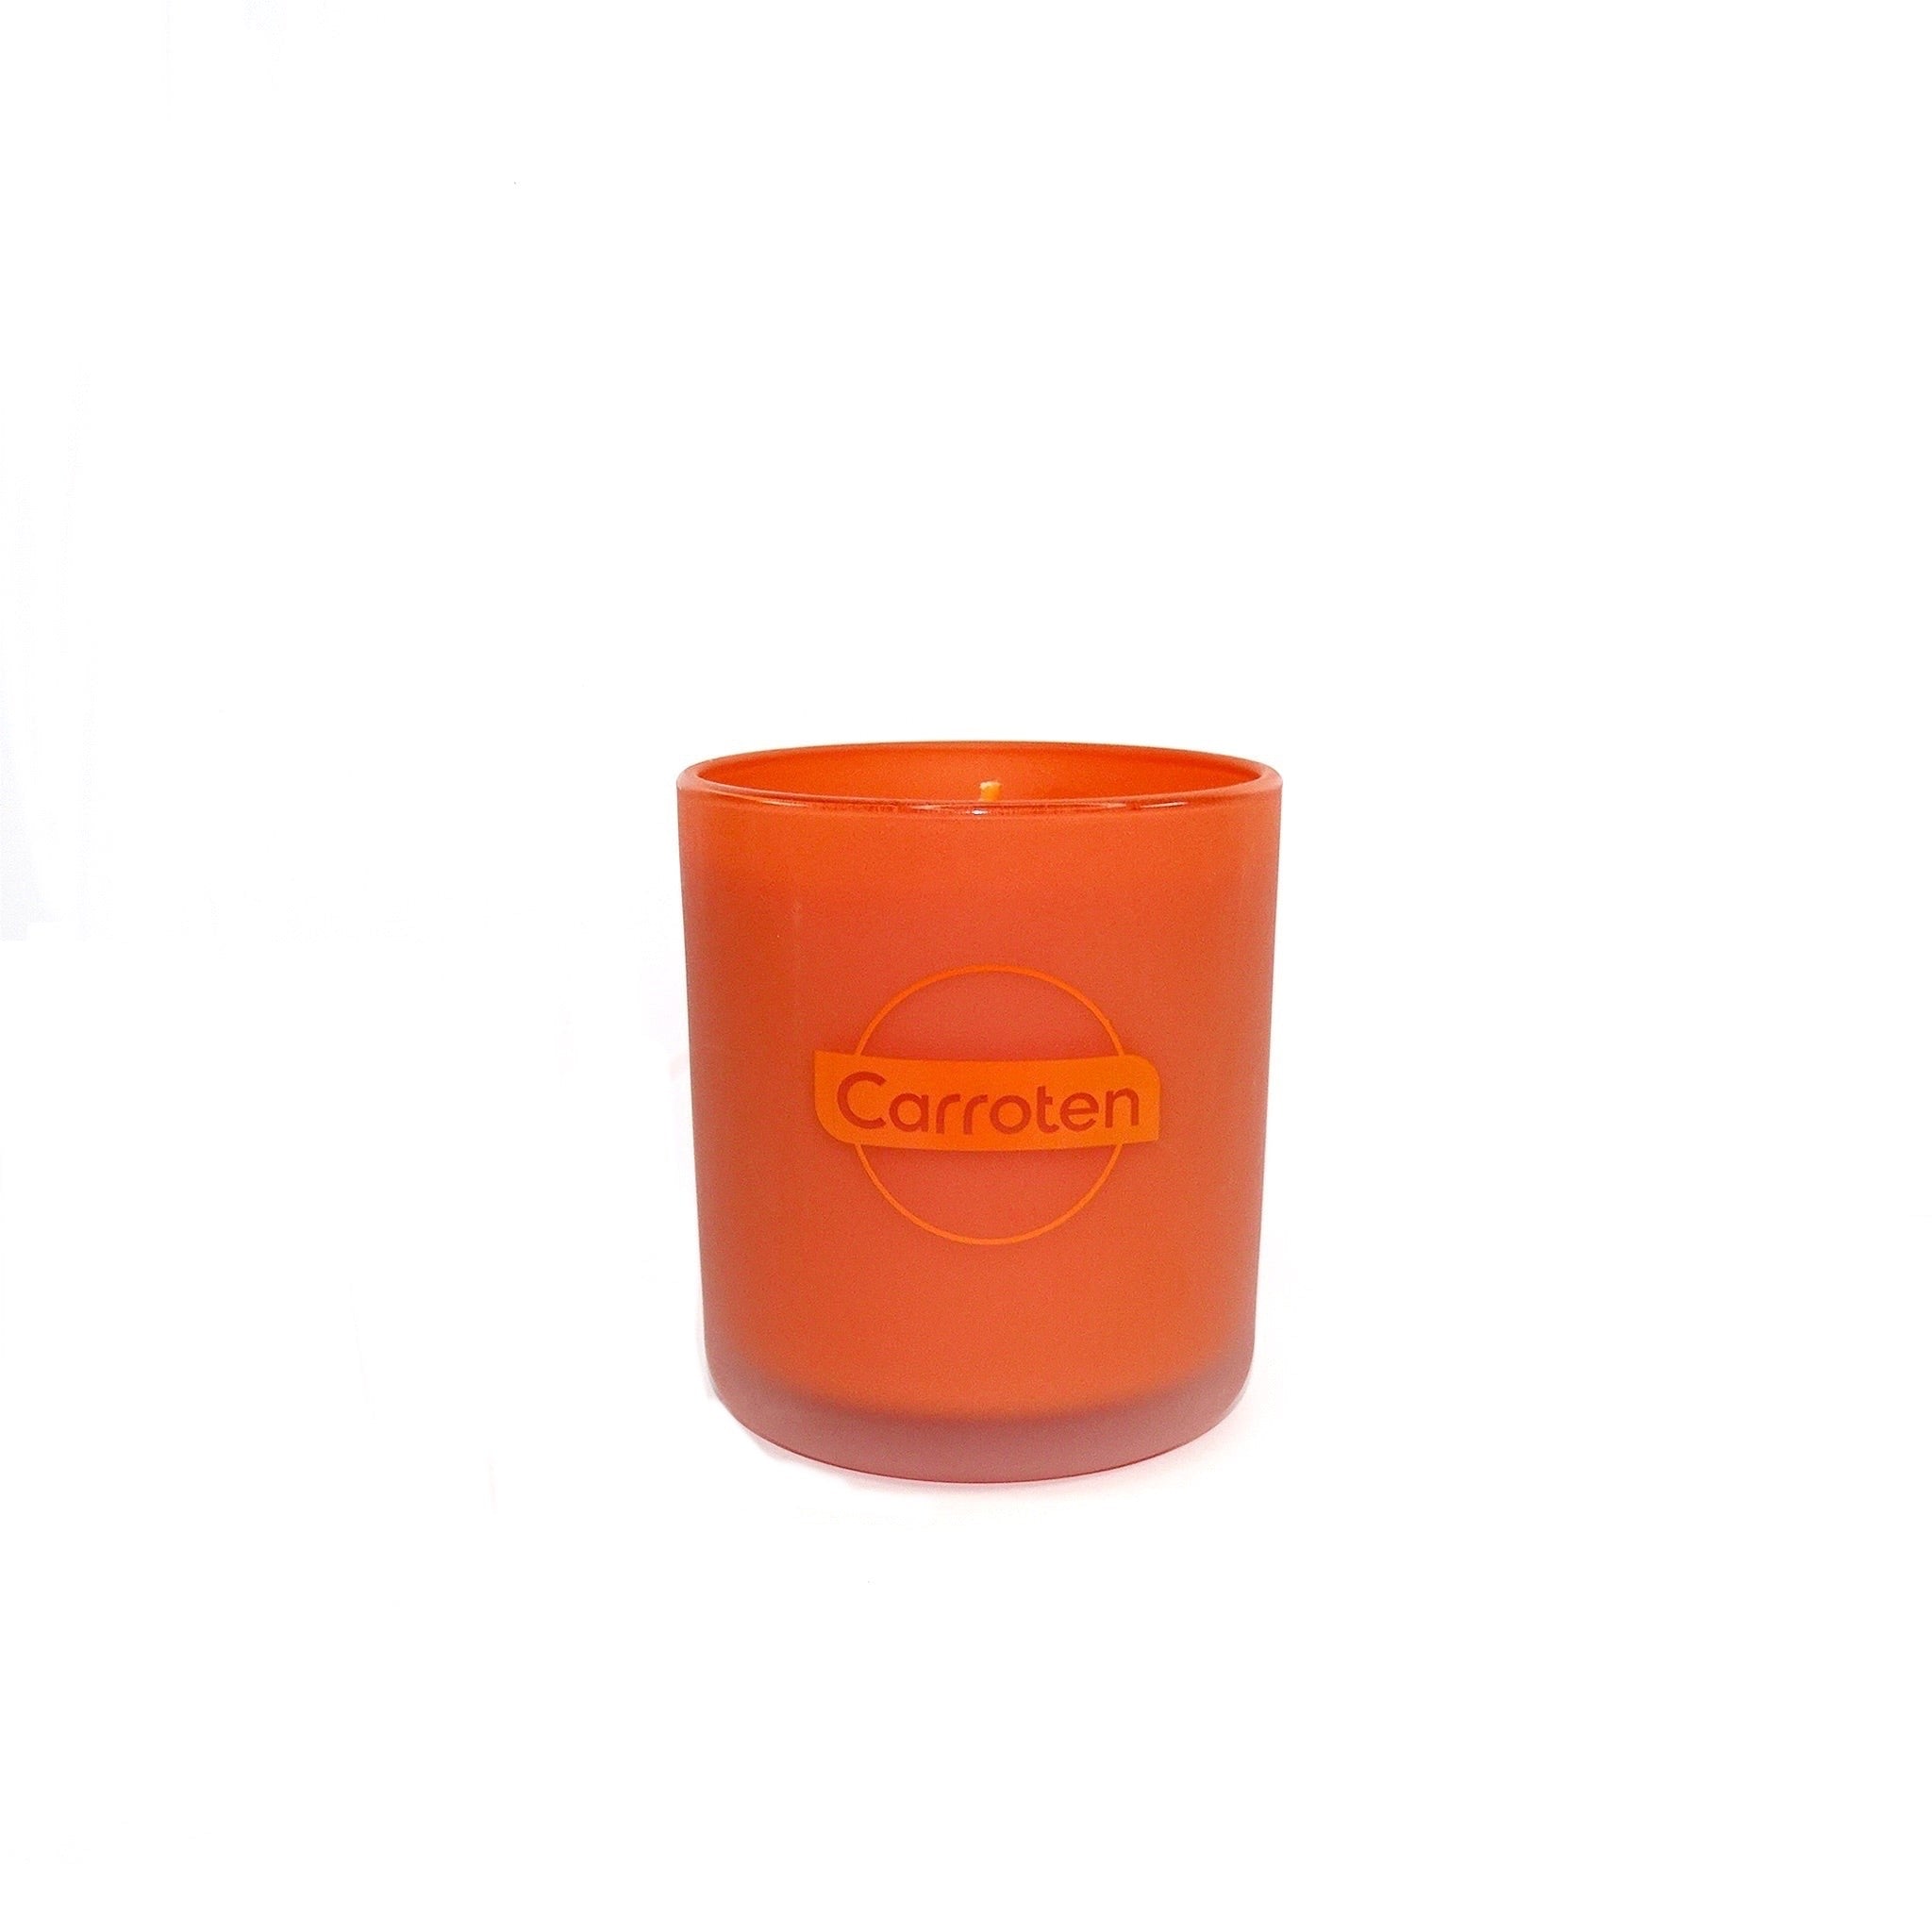 Carroten Scented Candle